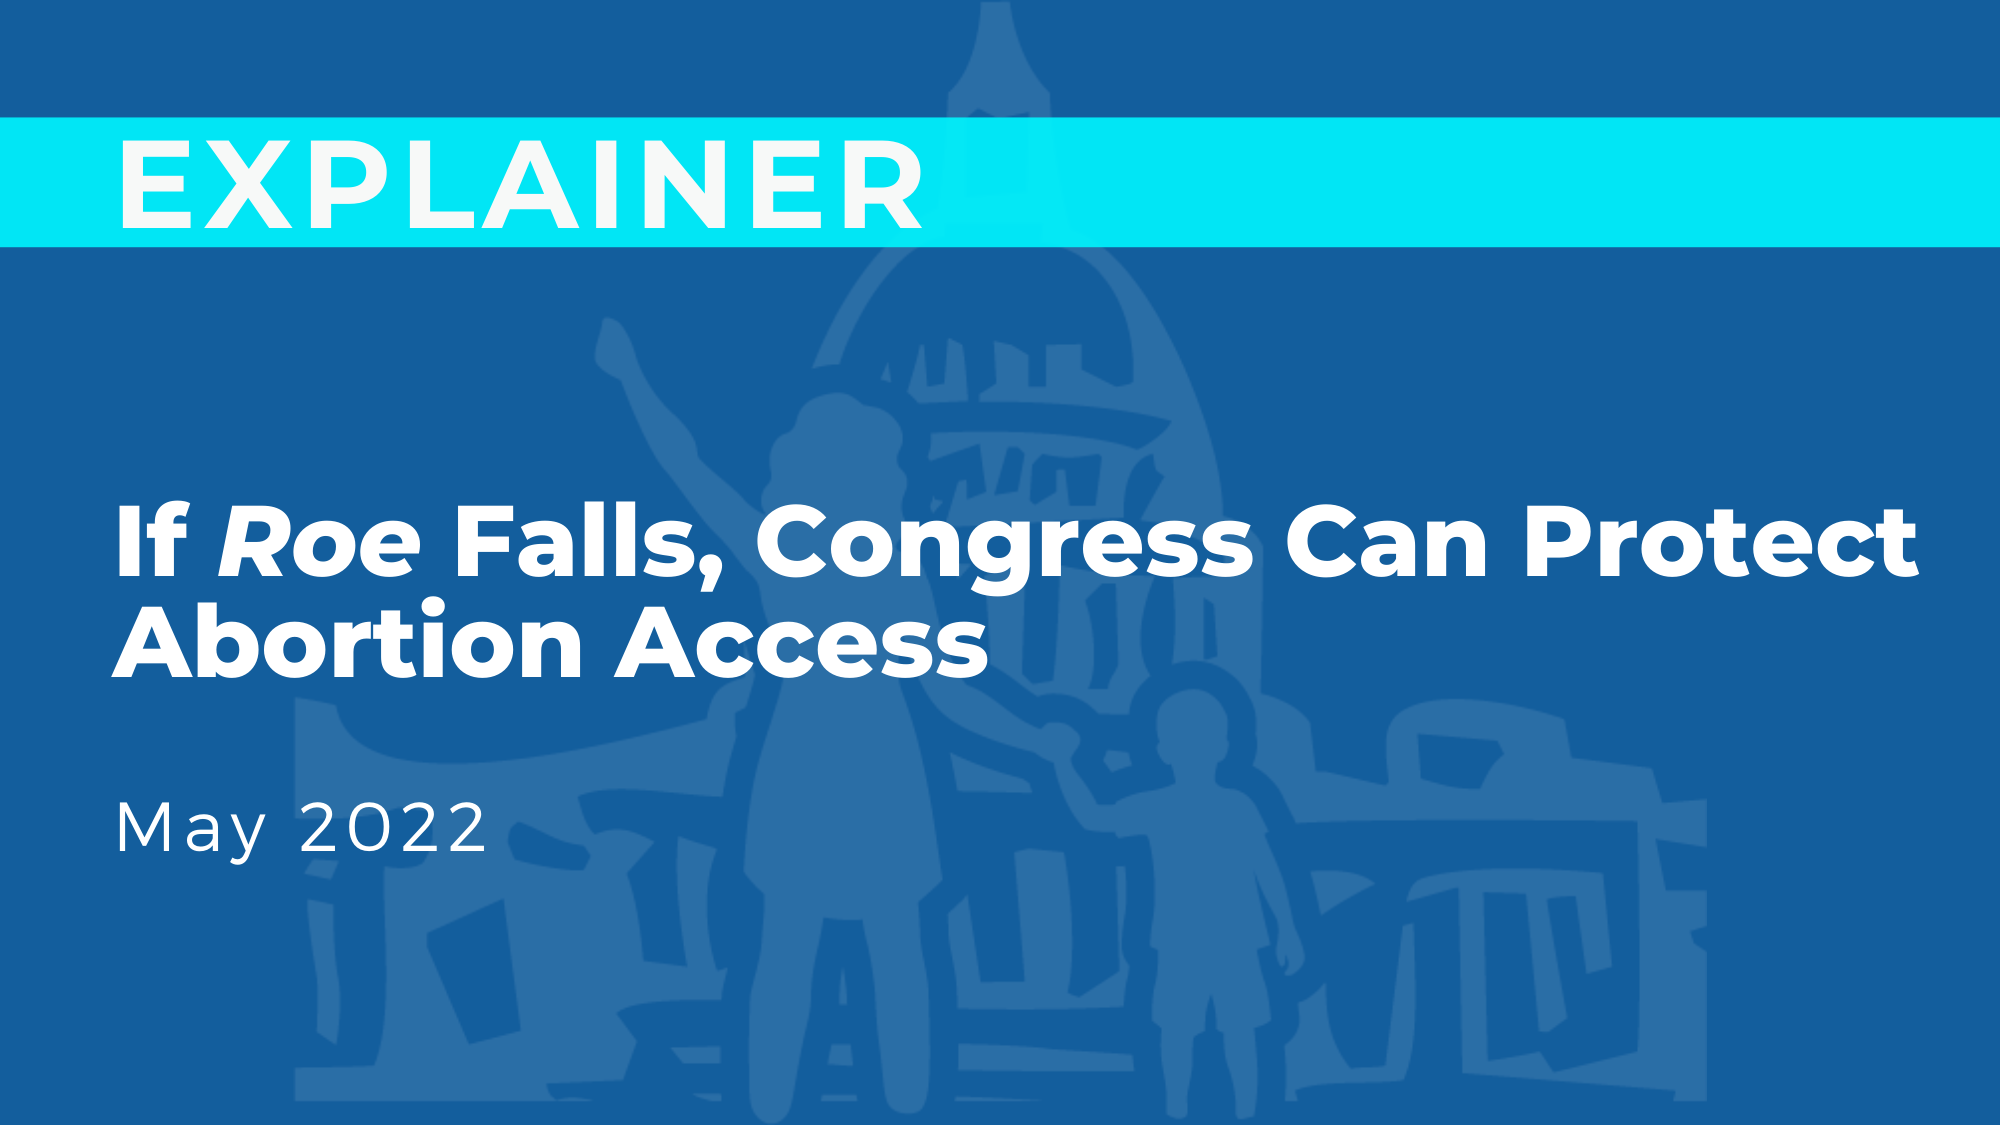 If Roe Falls, Congress Can Protect Abortion Access